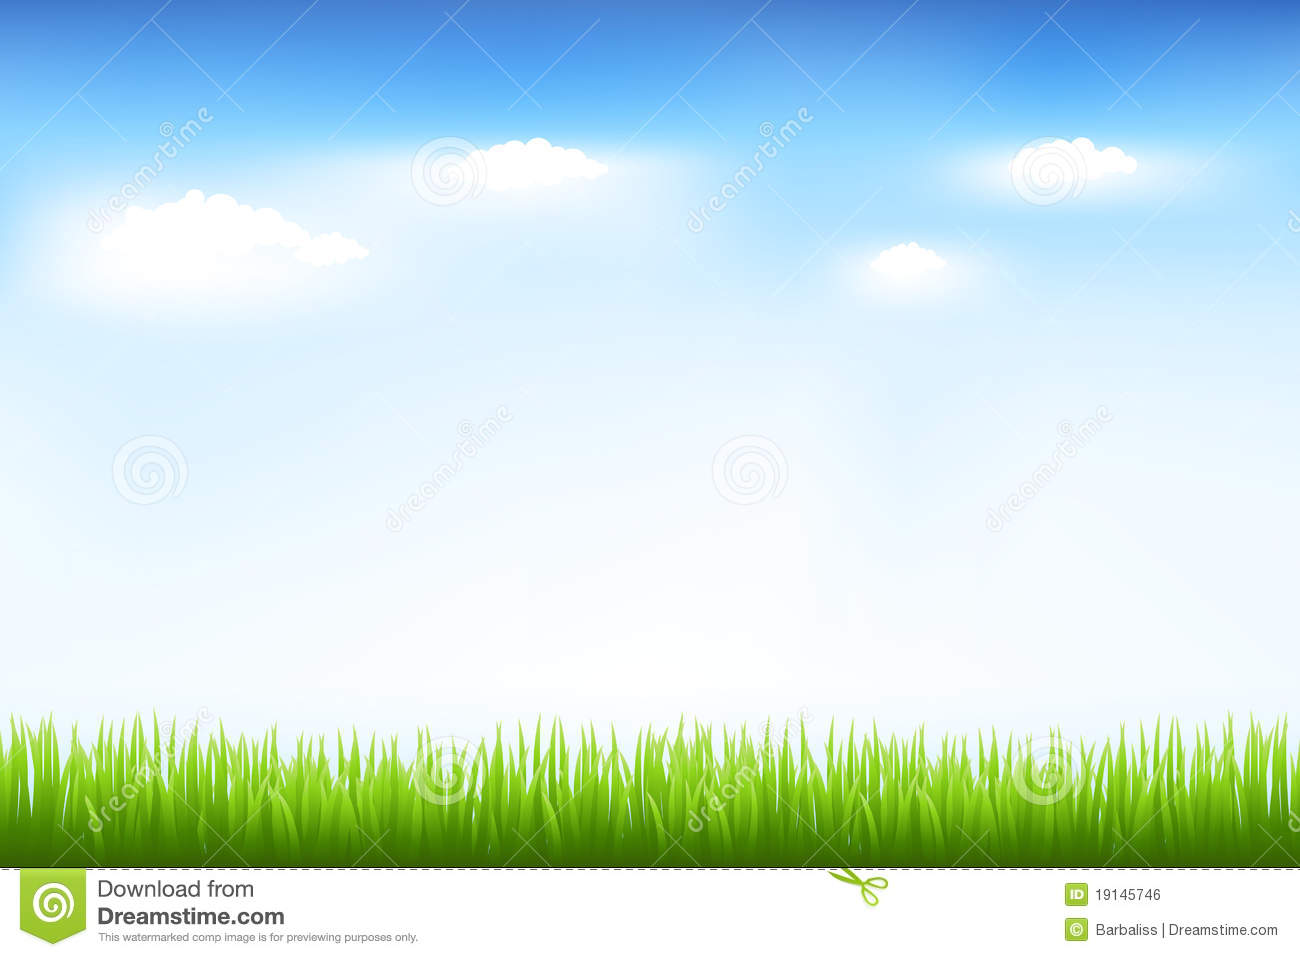 Green Grass And Blue Sky Royalty Free Stock Image   Image  19145746